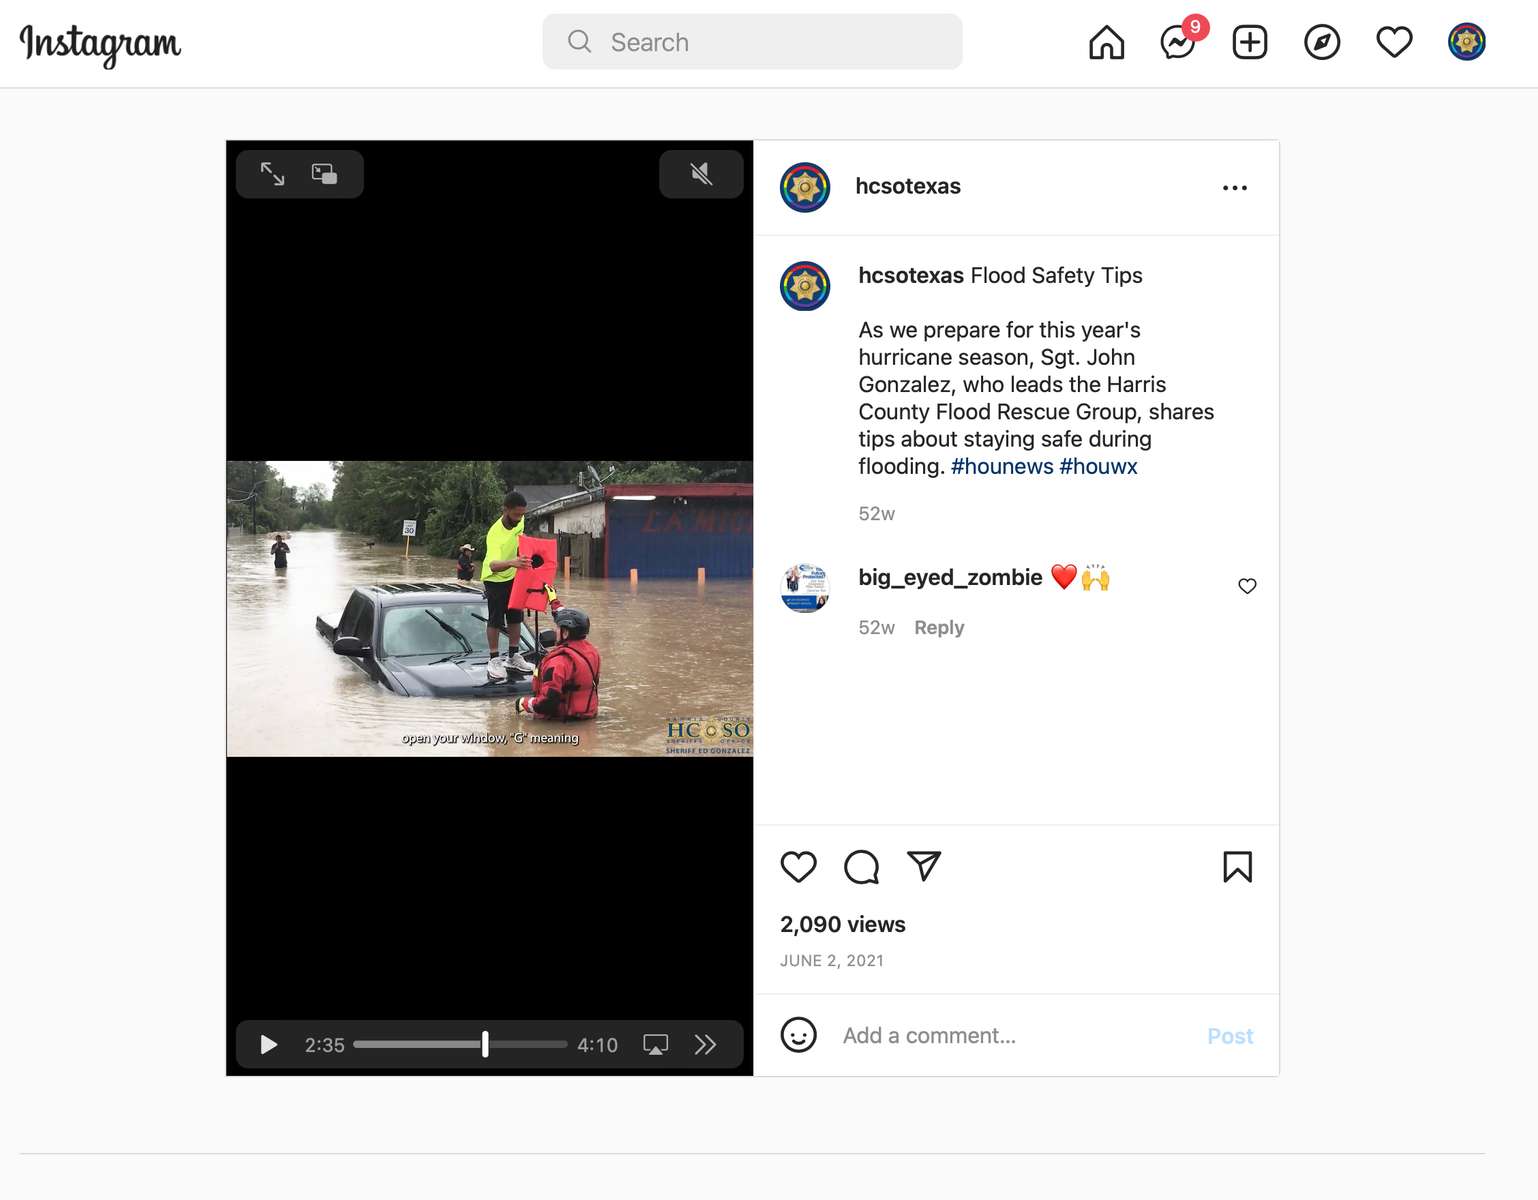 https://www.instagram.com/p/CPoU0E4p_7O/As we prepare for this year's hurricane season, Sgt. John Gonzalez, who leads the Harris County Flood Rescue Group, shares tips about staying safe during flooding. #hounews #houwx